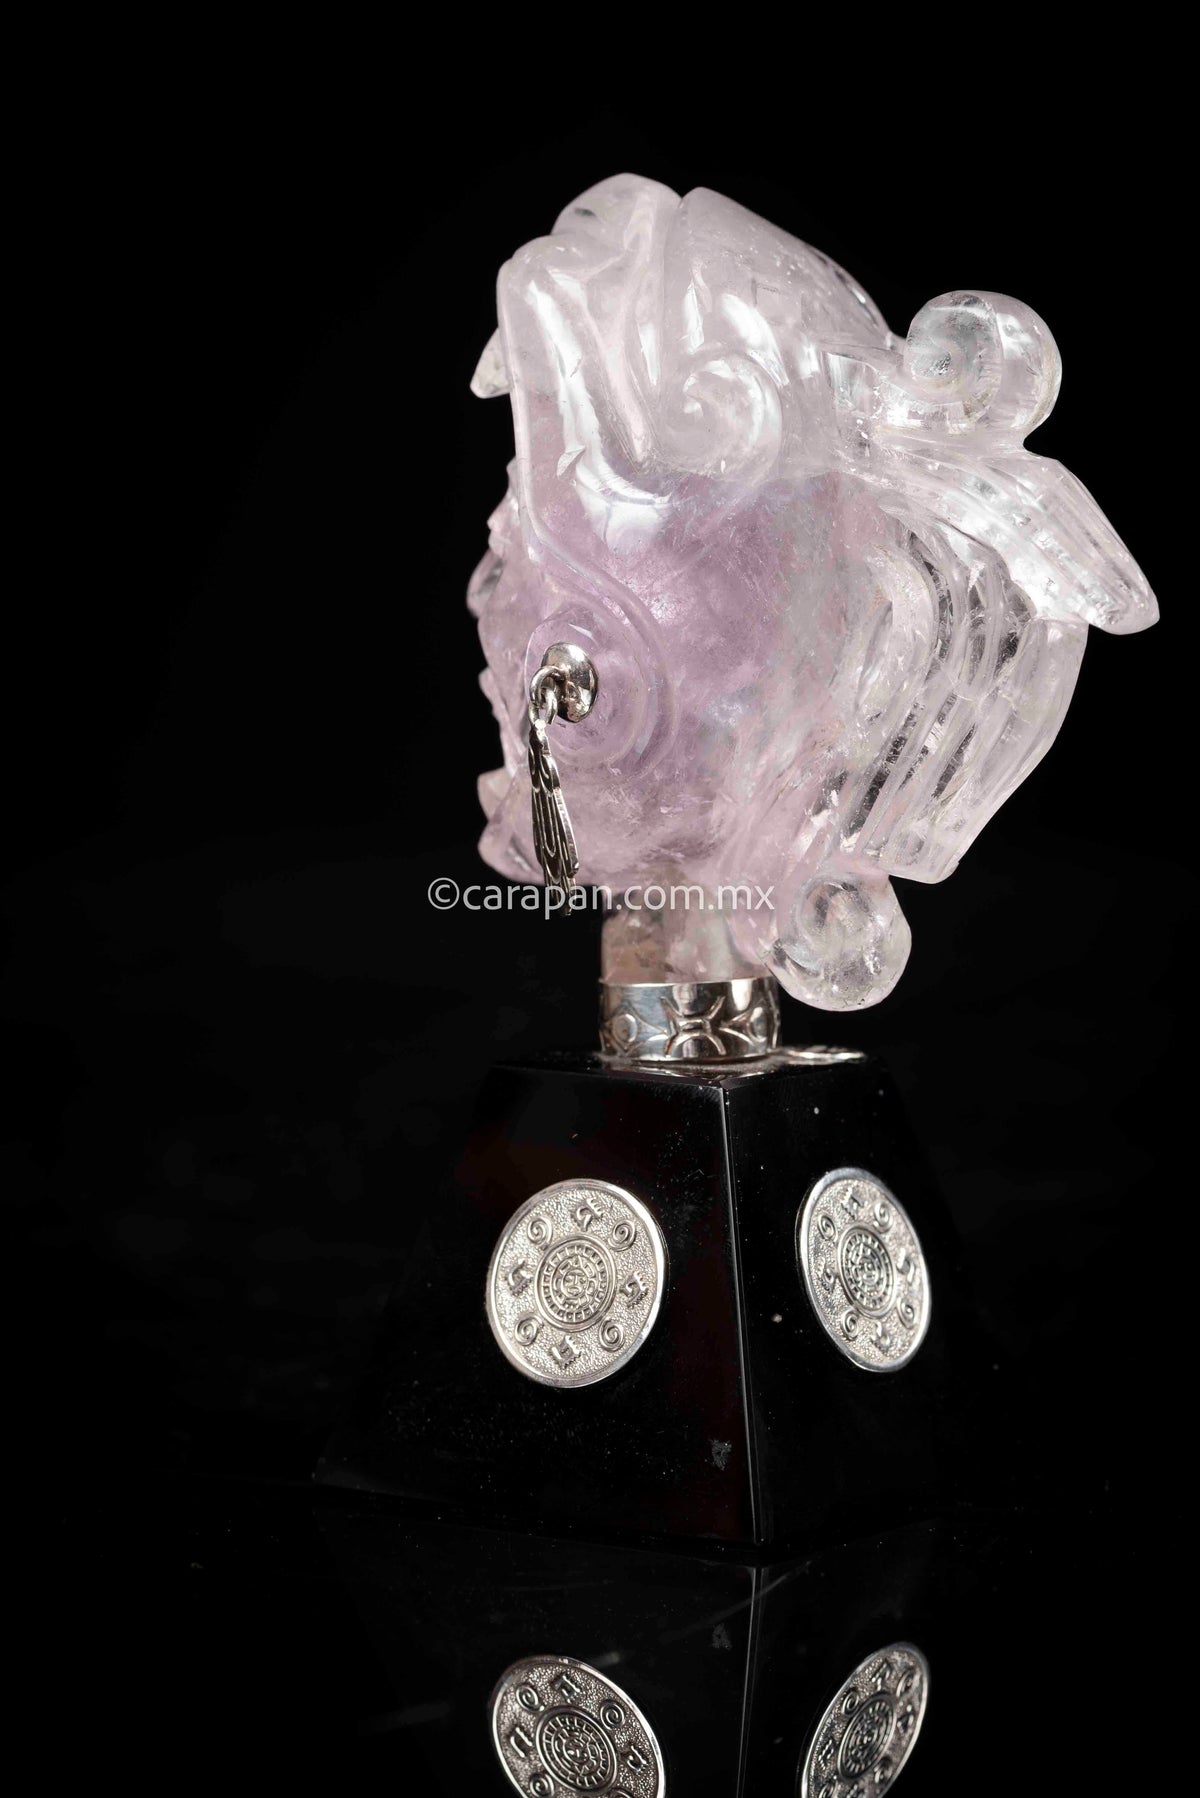 Jaguar Knight Head Sculpture Crafted in Amethyst with Silver & Lapis Lasuli on Obsidian base